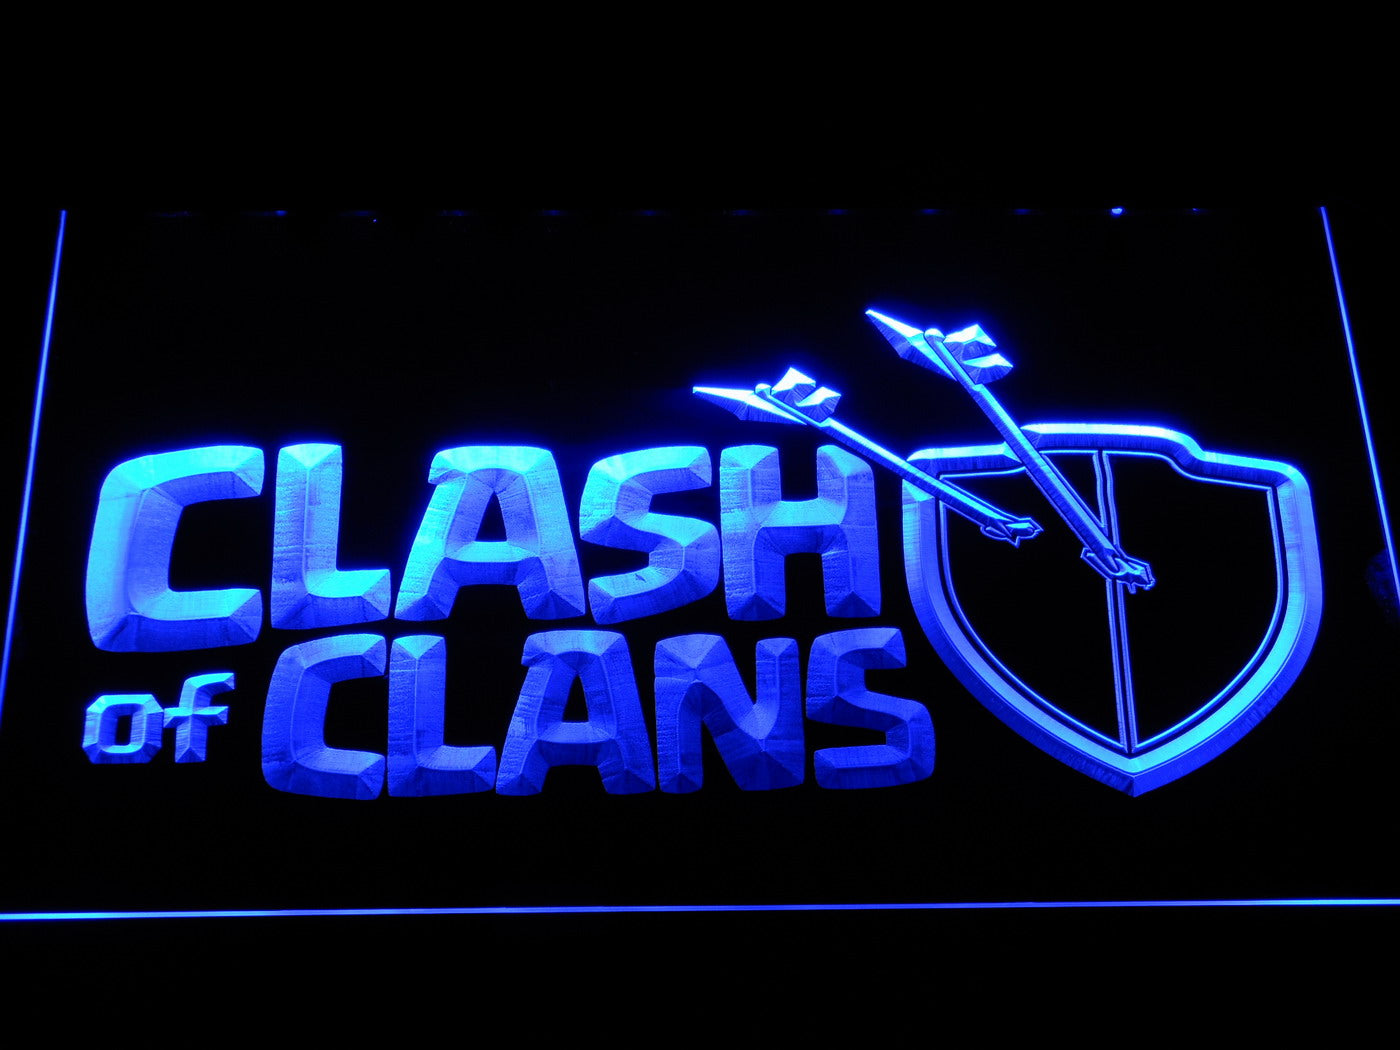 Clash Of Clans Strategy War Game Neon Light LED Sign